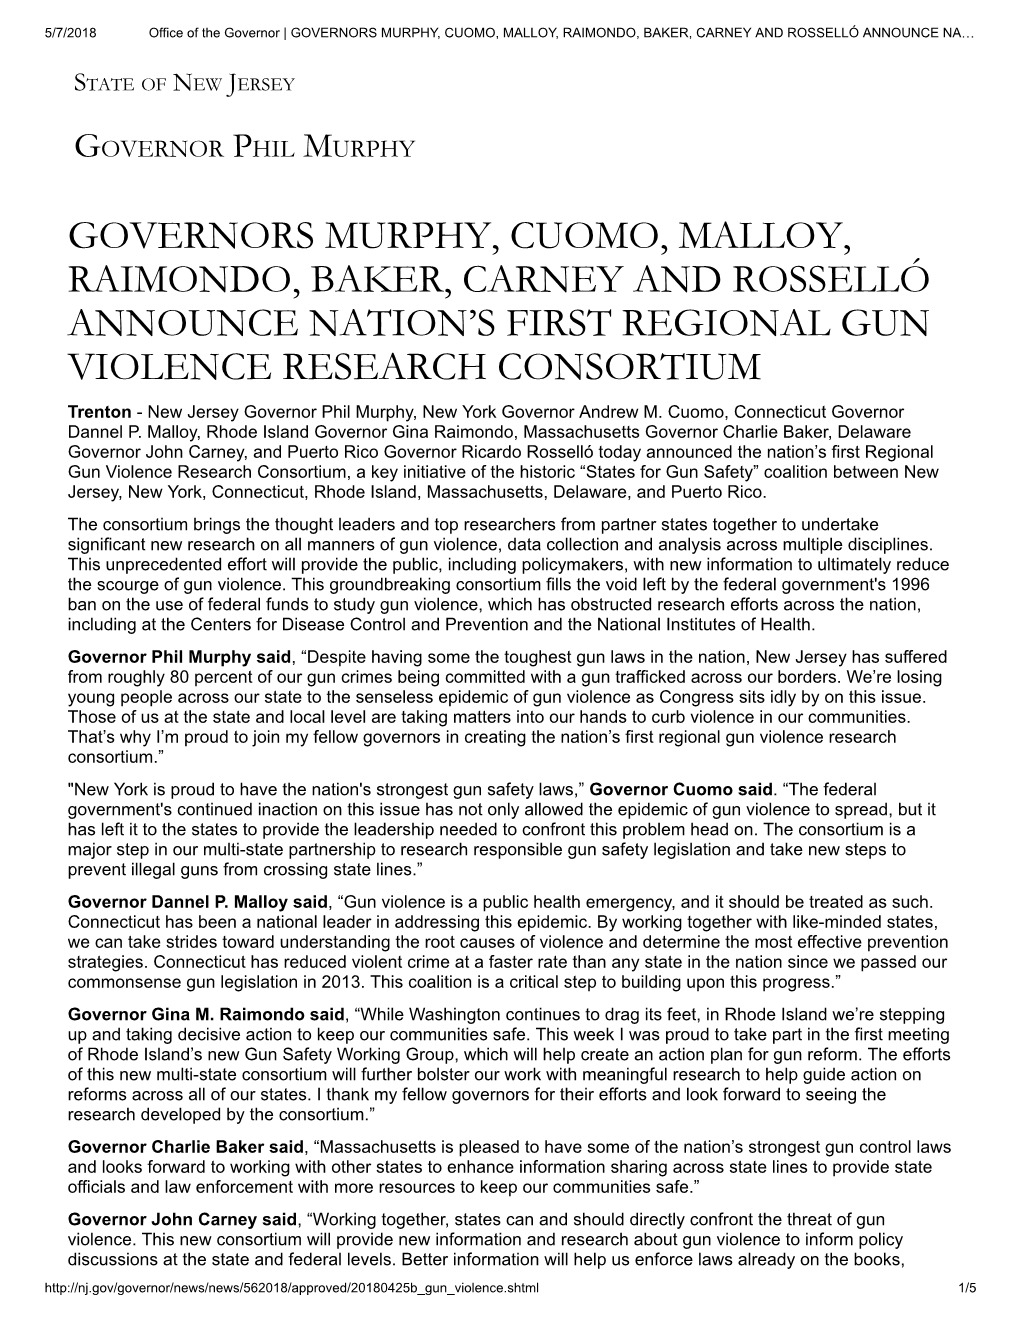 Governors Murphy, Cuomo, Malloy, Raimondo, Baker, Carney and Rosselló Announce Na…